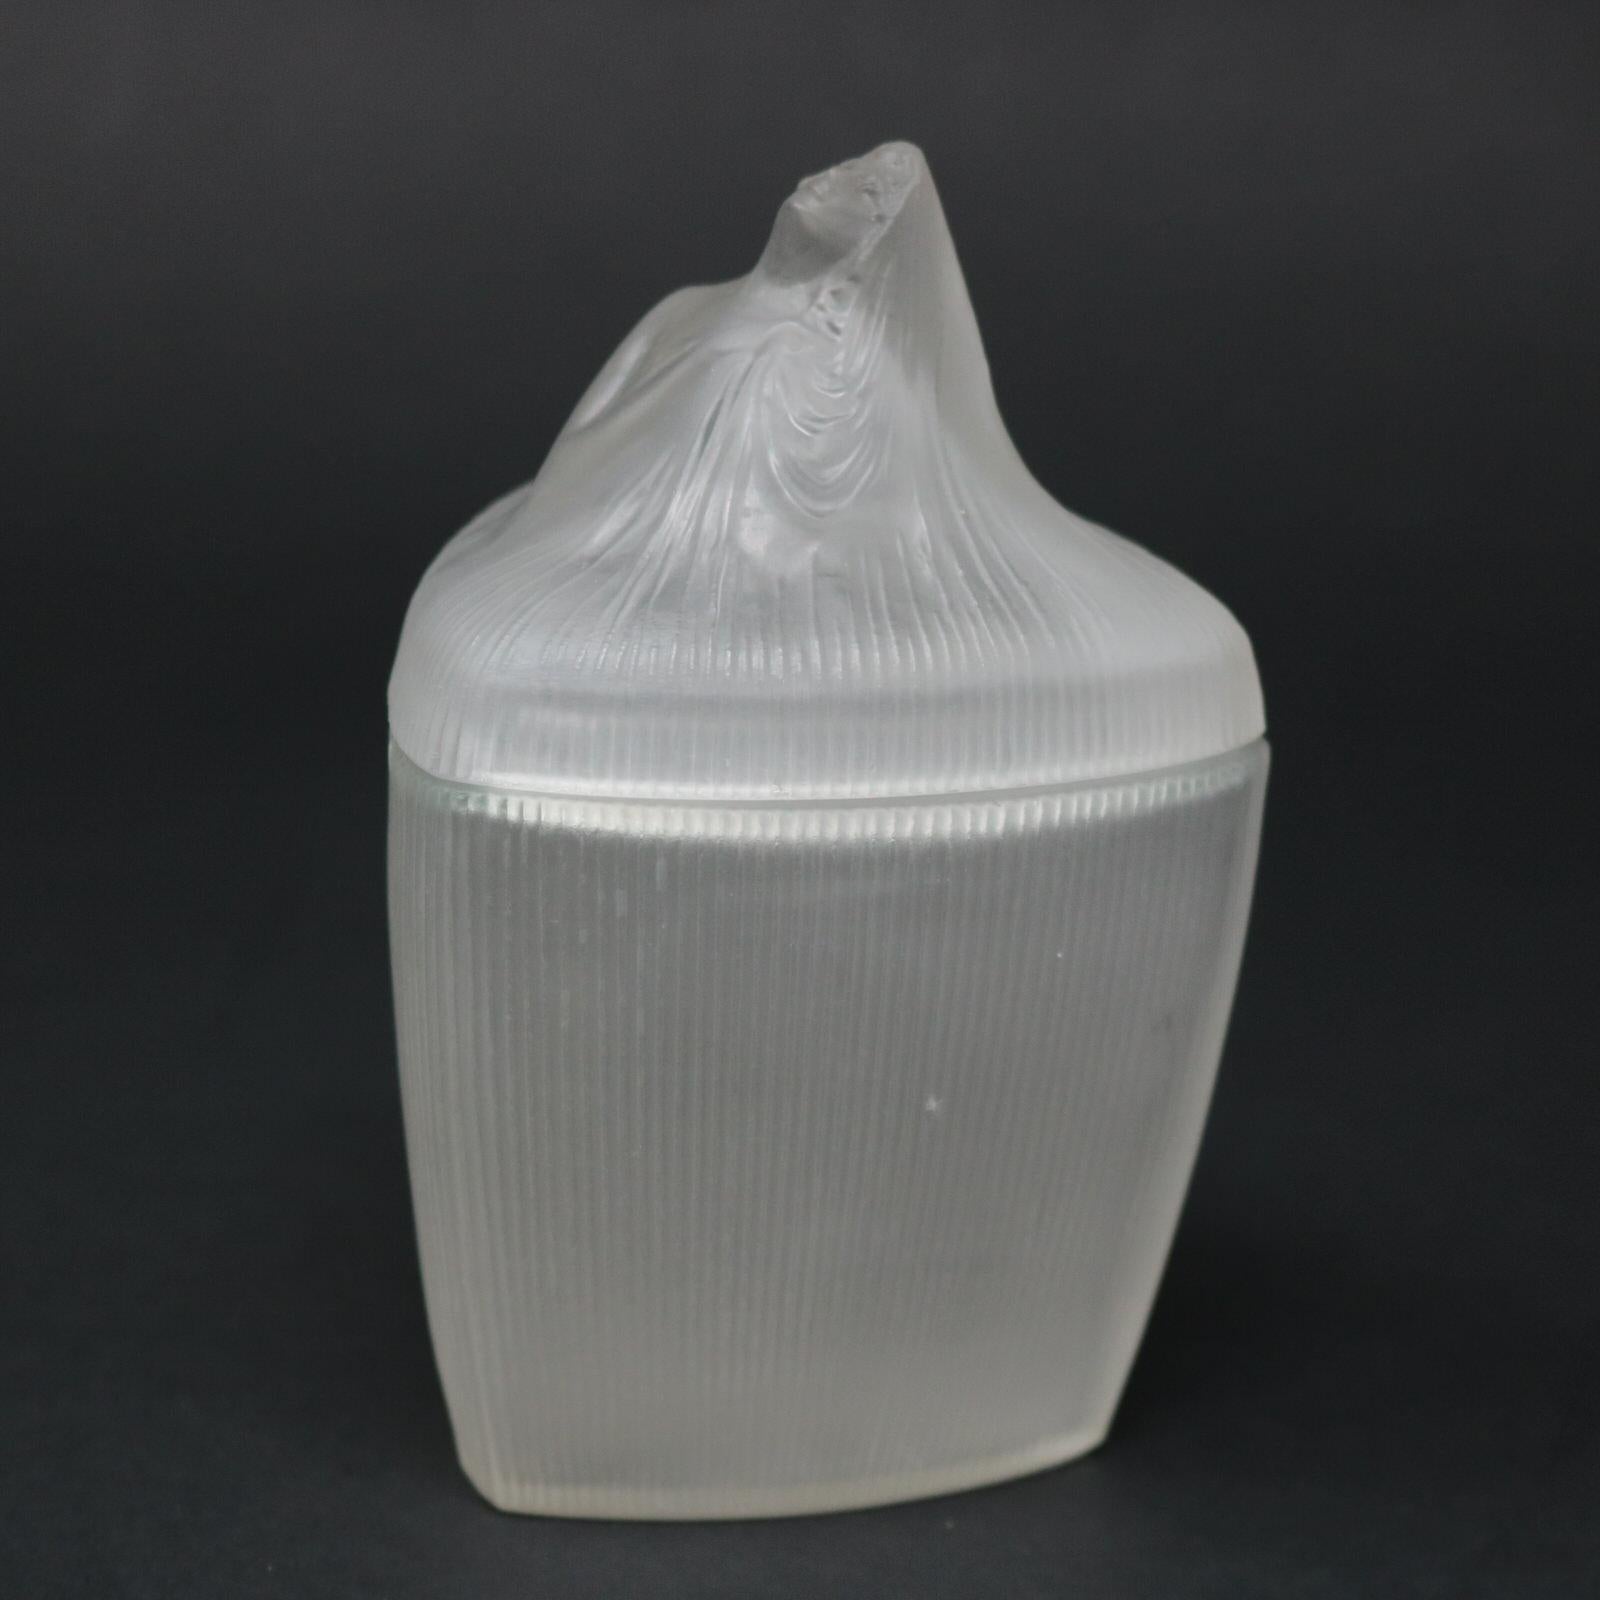 Rene Lalique frosted glass Coty-4 'Tete Femme' triangular ointment jar. This model features a female head on the lid, wearing a long veil. The veil flows down the lid, forming the decoration for the sides of the pot. Moulded makers mark, 'R